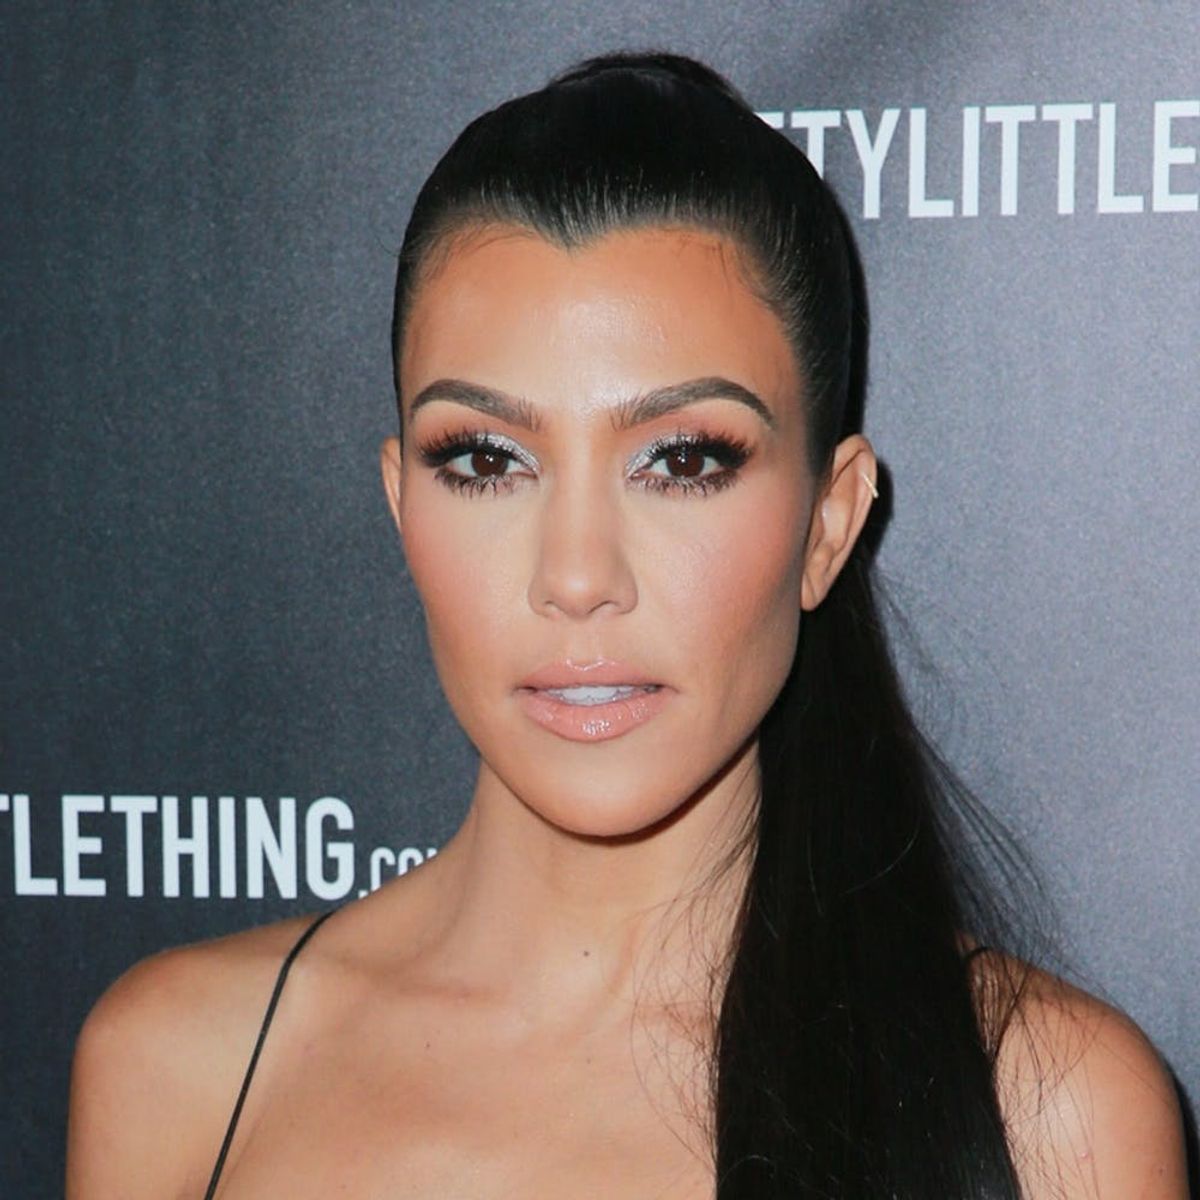 Kourtney Kardashian (Sort Of) Explains Why Kylie Jenner’s Not in the Most Recent Family Pic